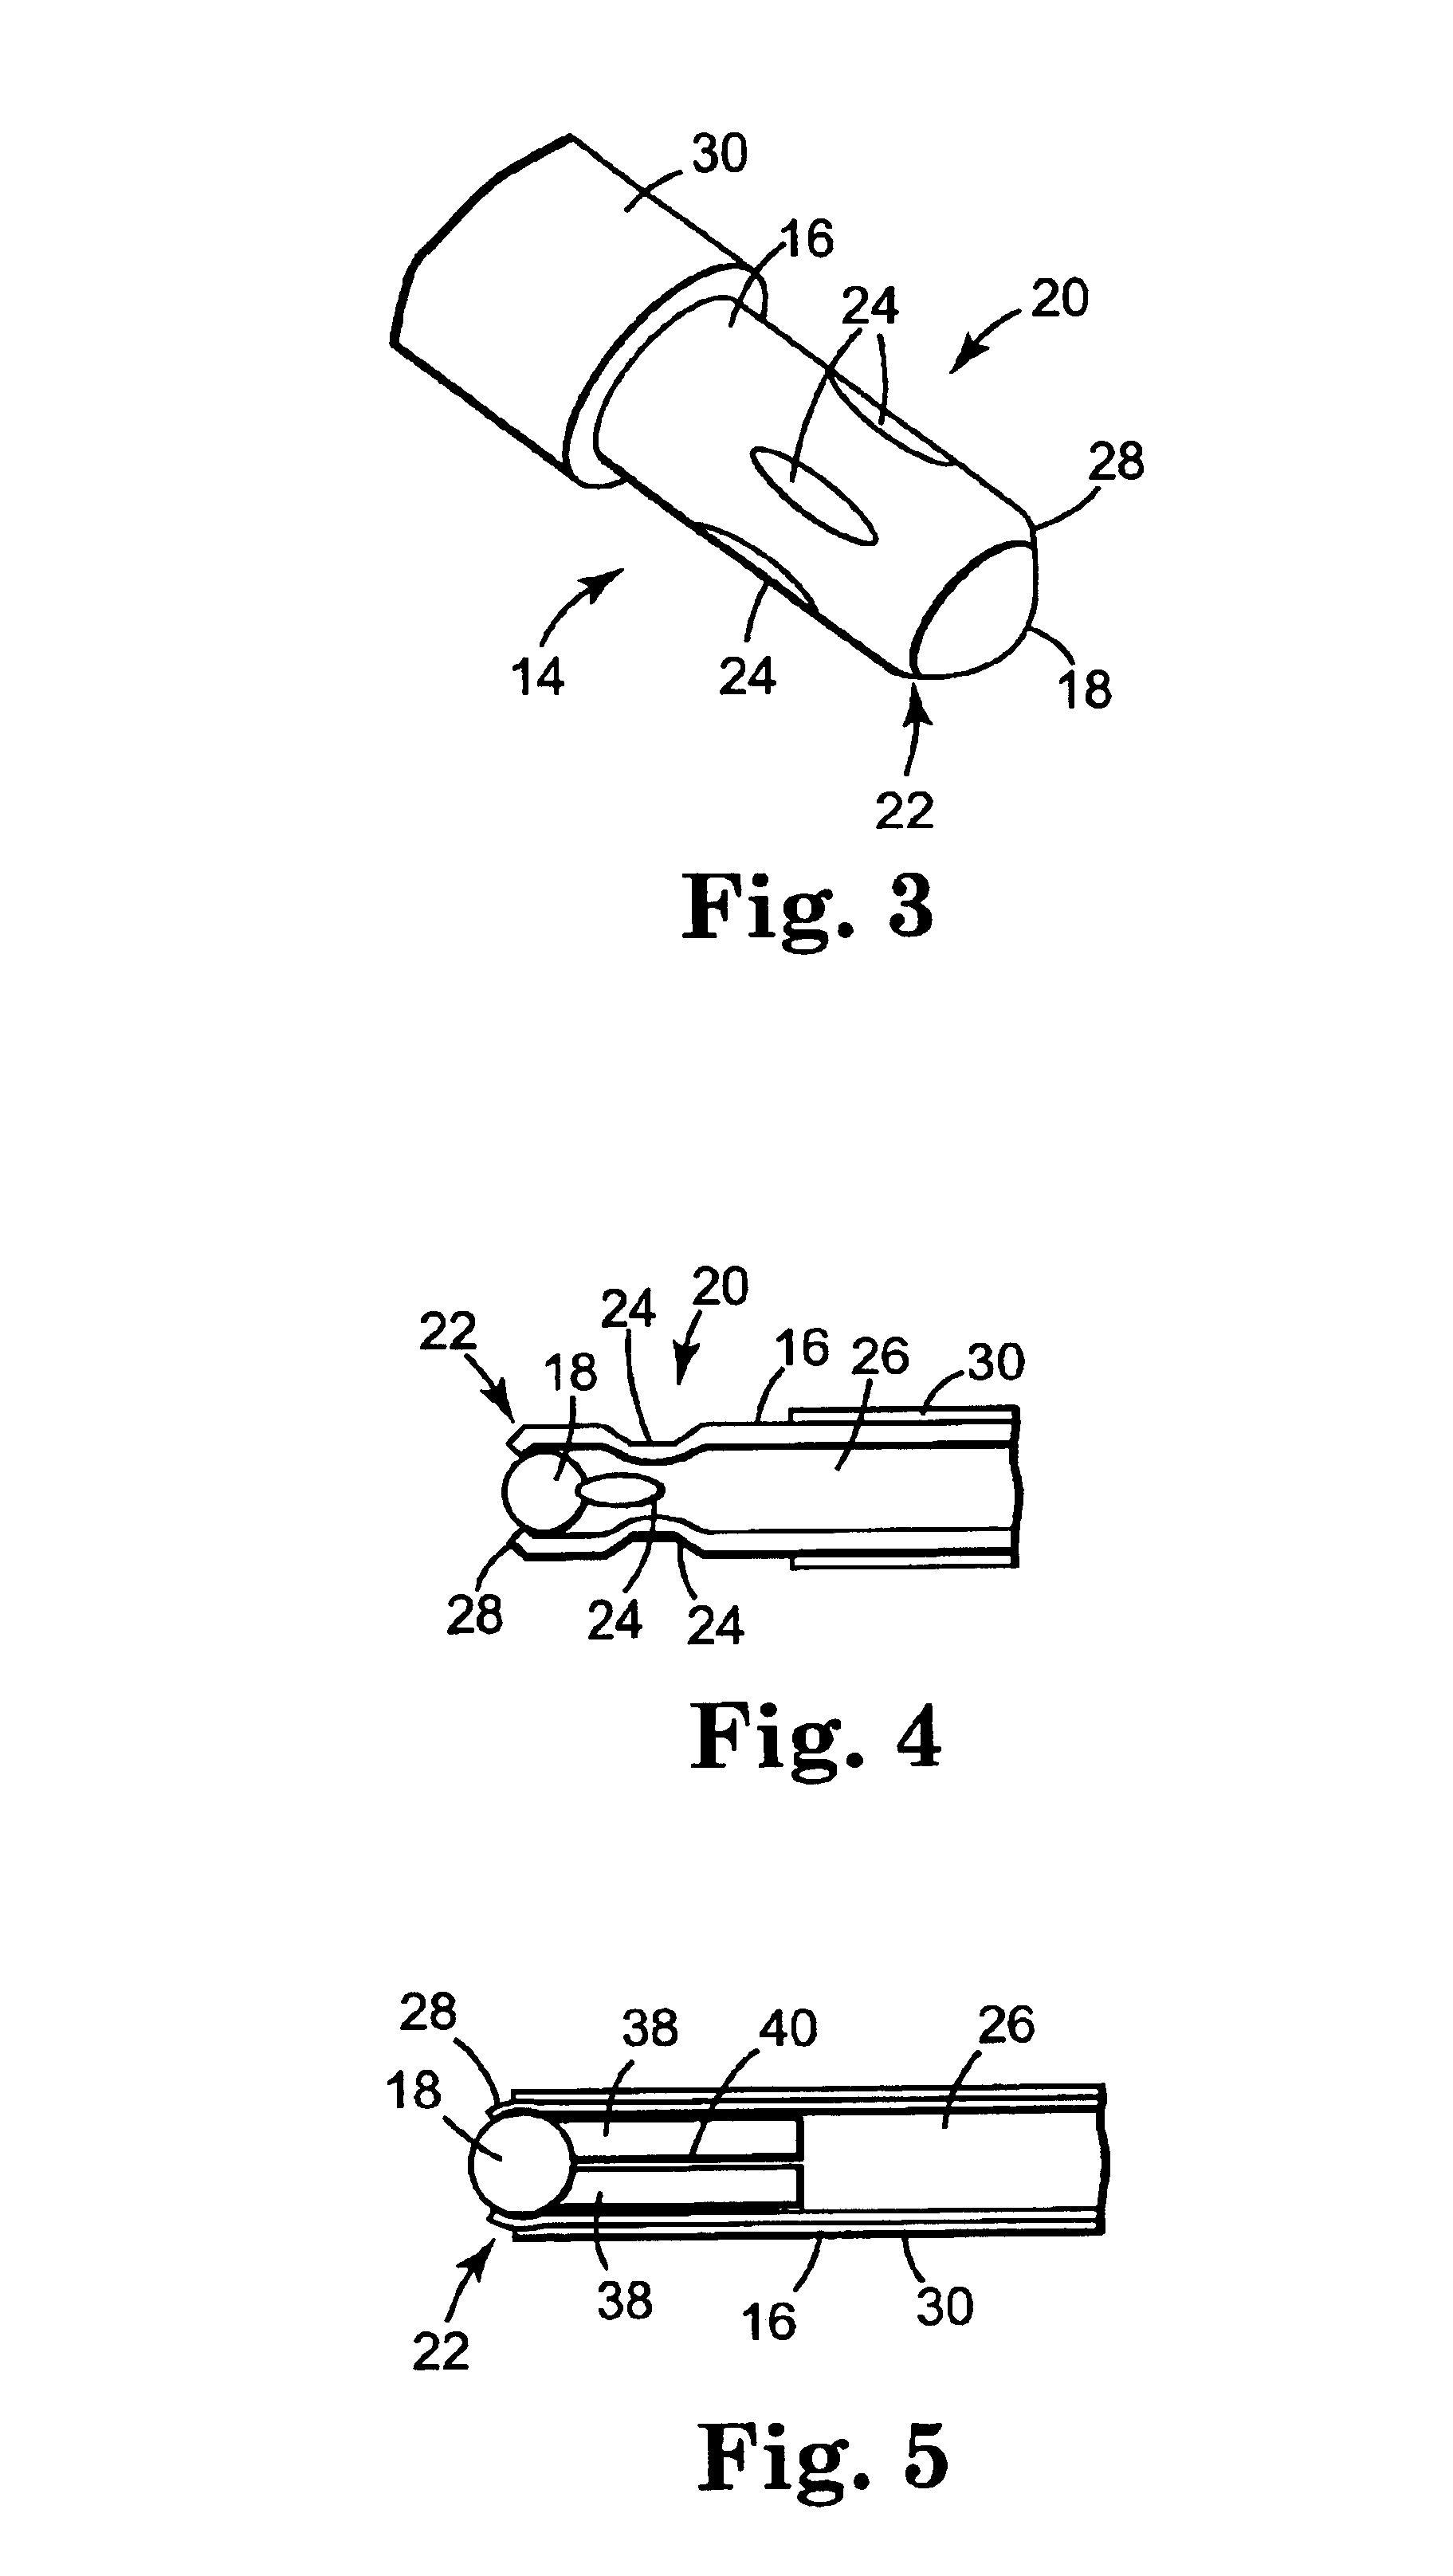 Pen-type electrosurgical instrument